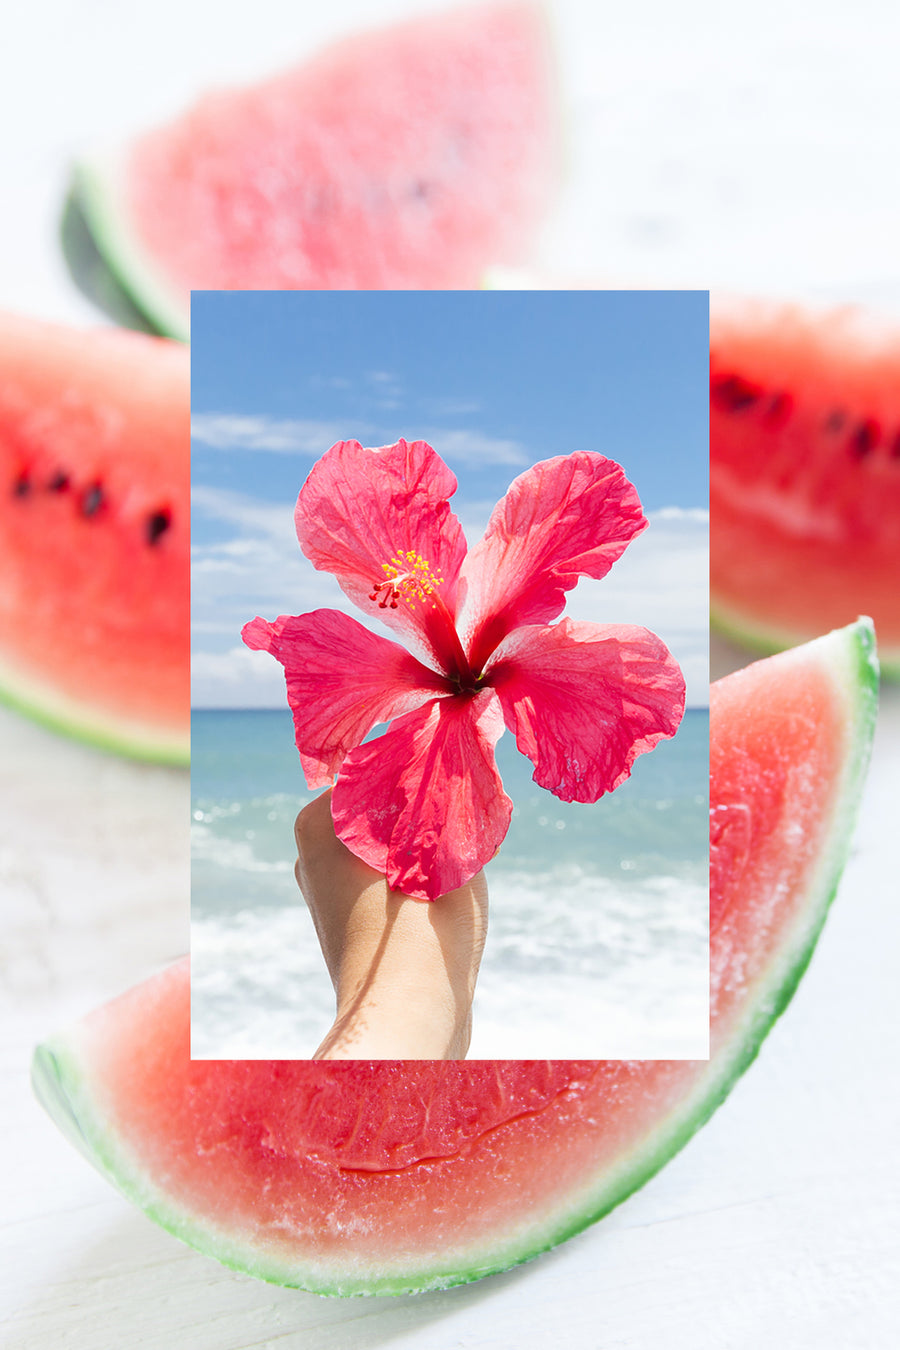 hand holding Hibiscus flower with fresh watermelon slices in background